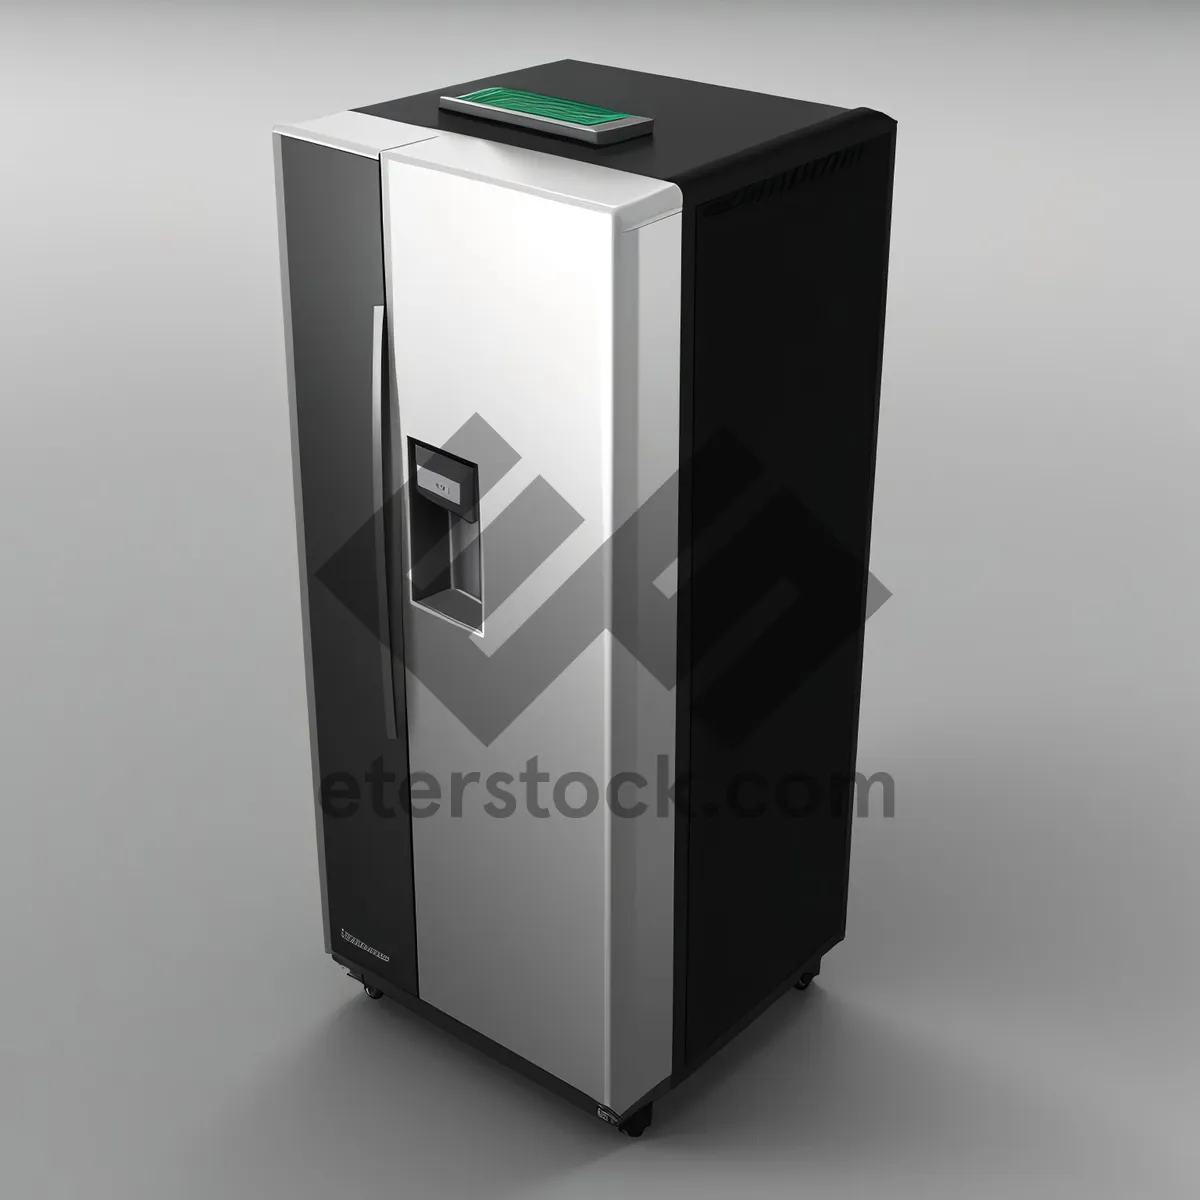 Picture of 3D Render of External Drive Storage Device